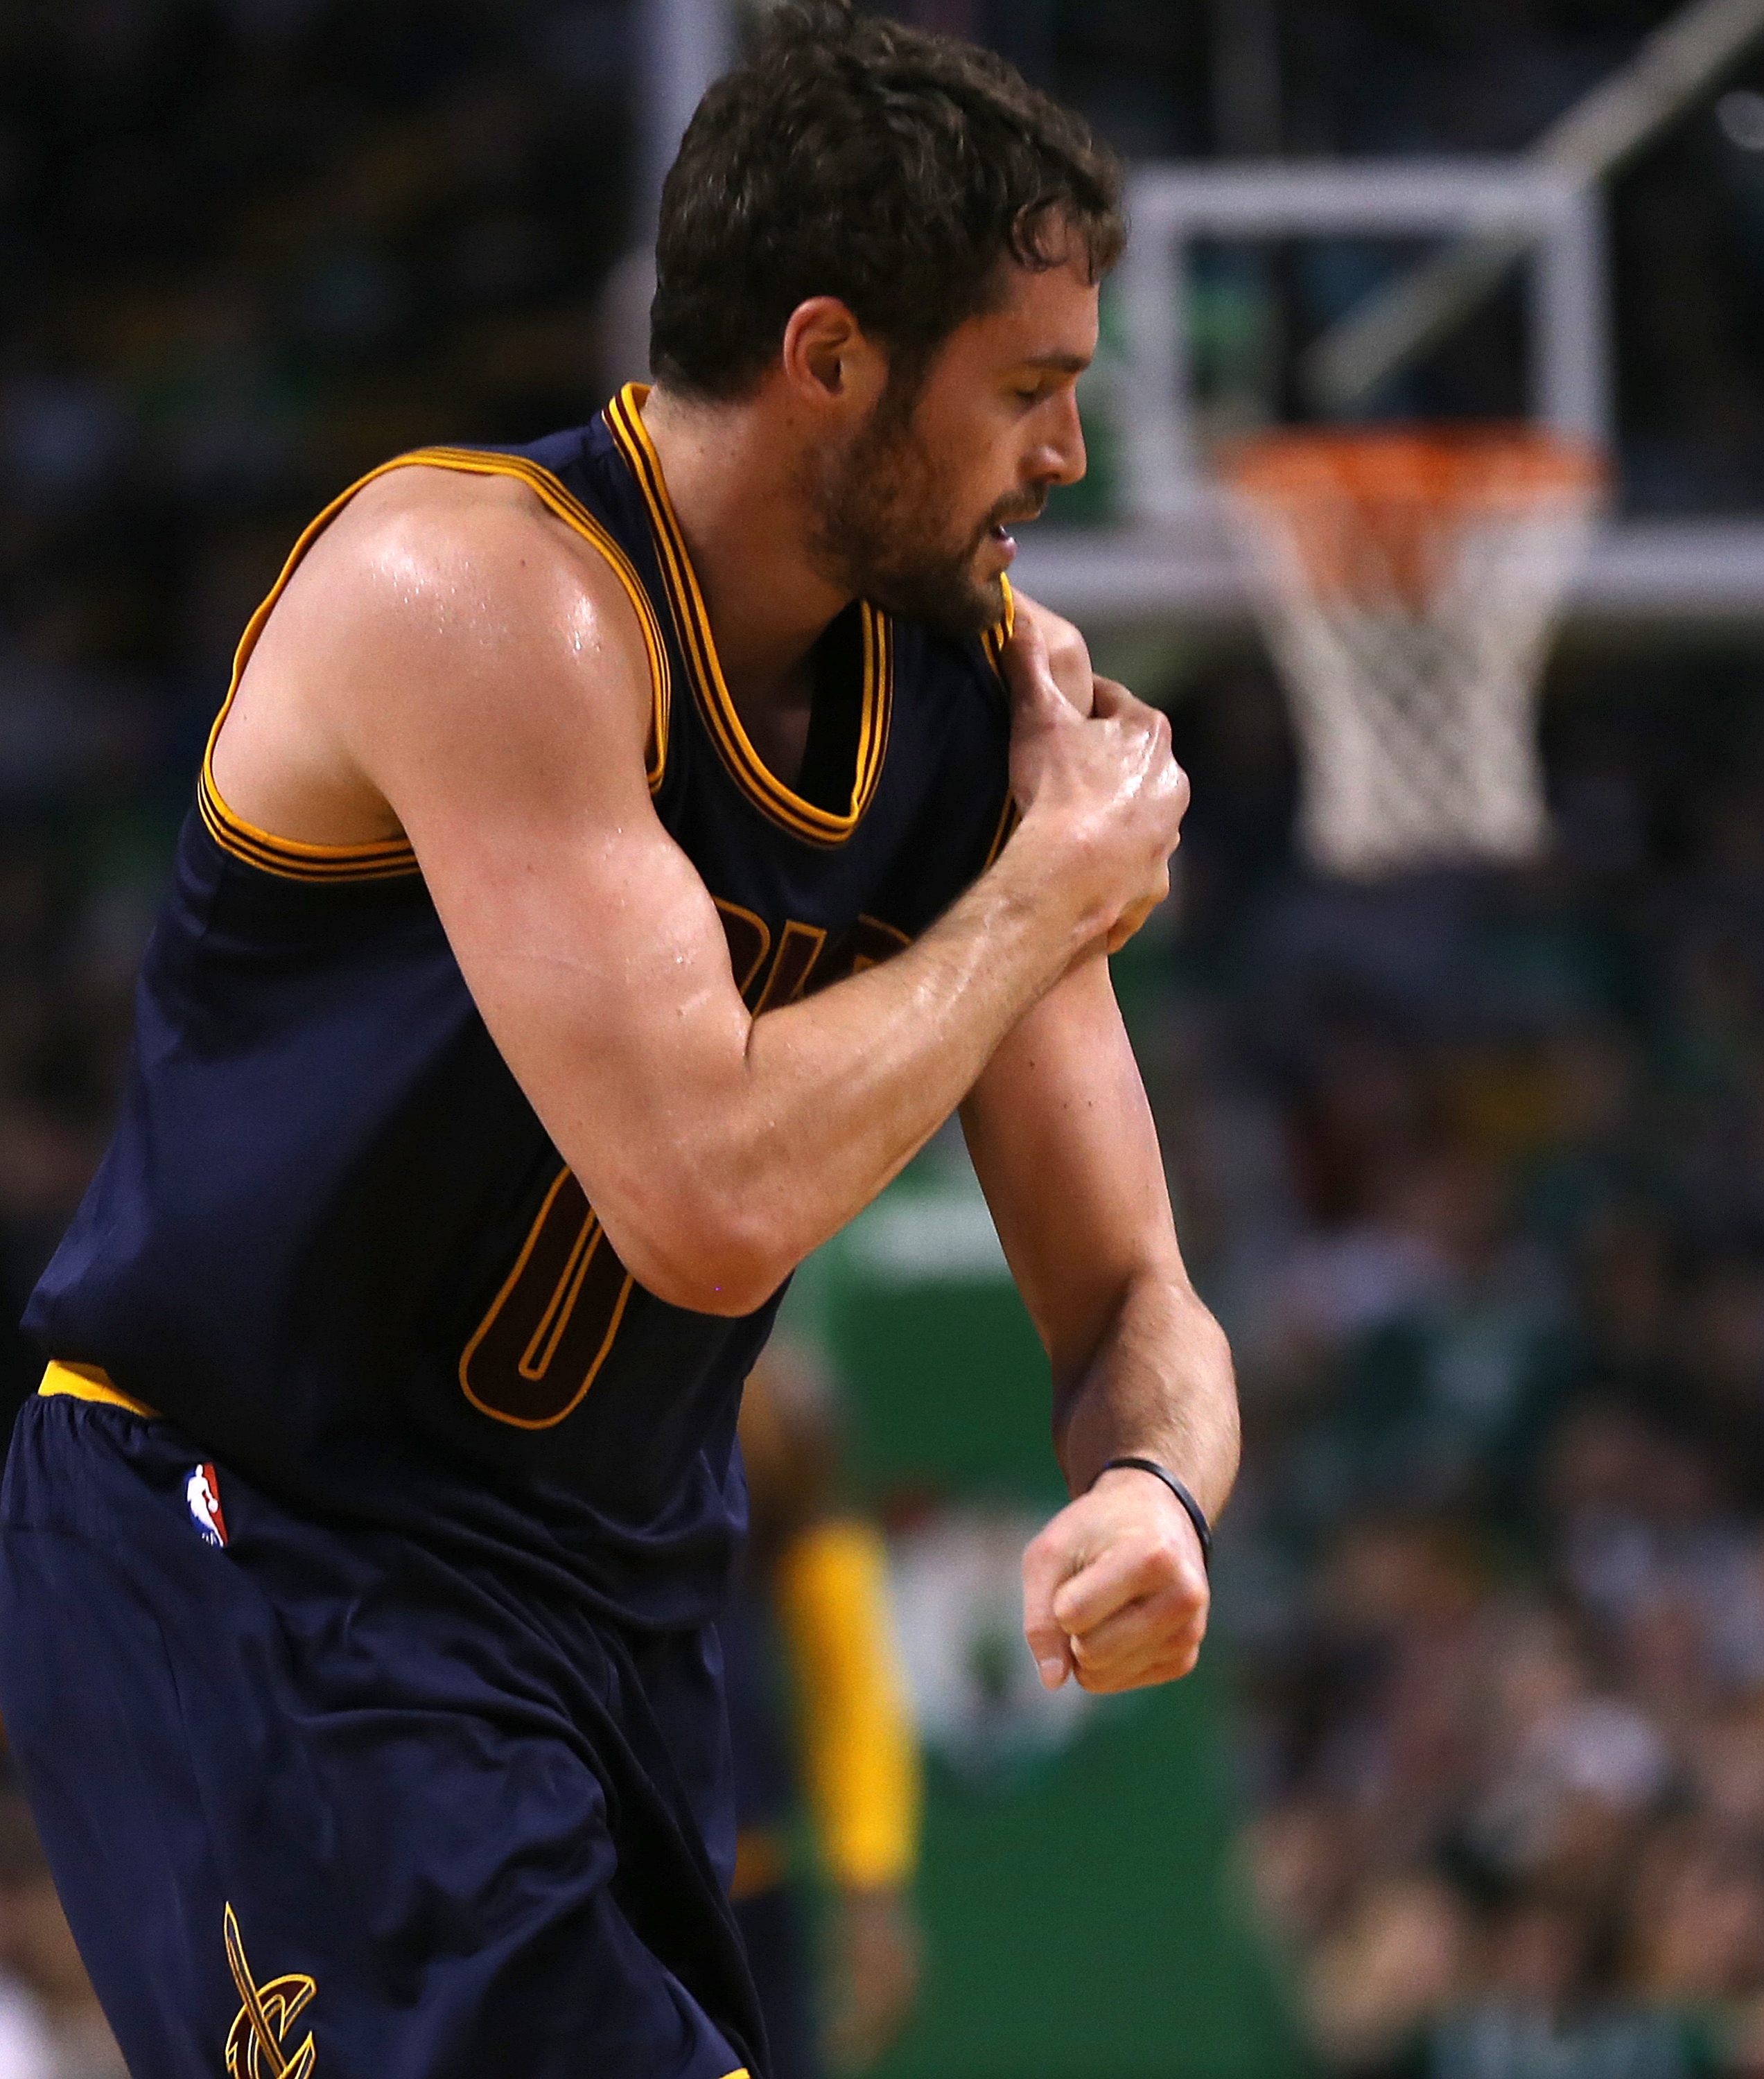 BOSTON, MA - APRIL 26: Kevin Love #0 of the Cleveland Cavaliers reacts after an shoulder injury against the Boston Celtics in the first quarter in Game Four during the first round of the 2015 NBA Playoffs on April 26, 2015 at TD Garden in Boston, Massachusetts. (Photo by Jim Rogash/Getty Images)